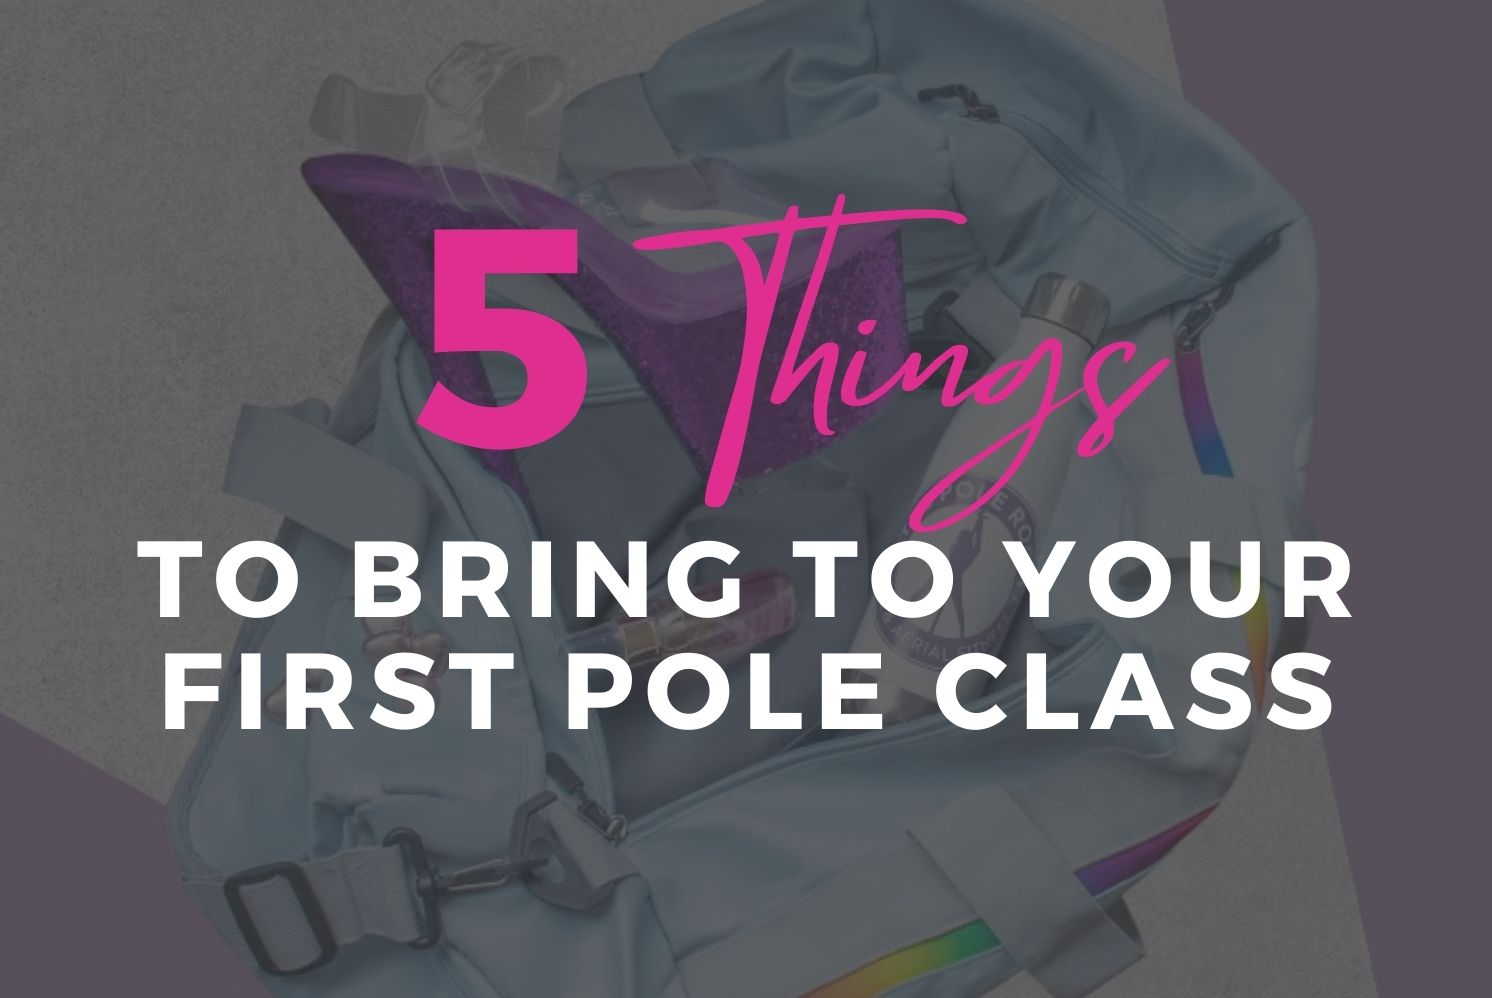 5 Things to Bring to Your First Pole Class